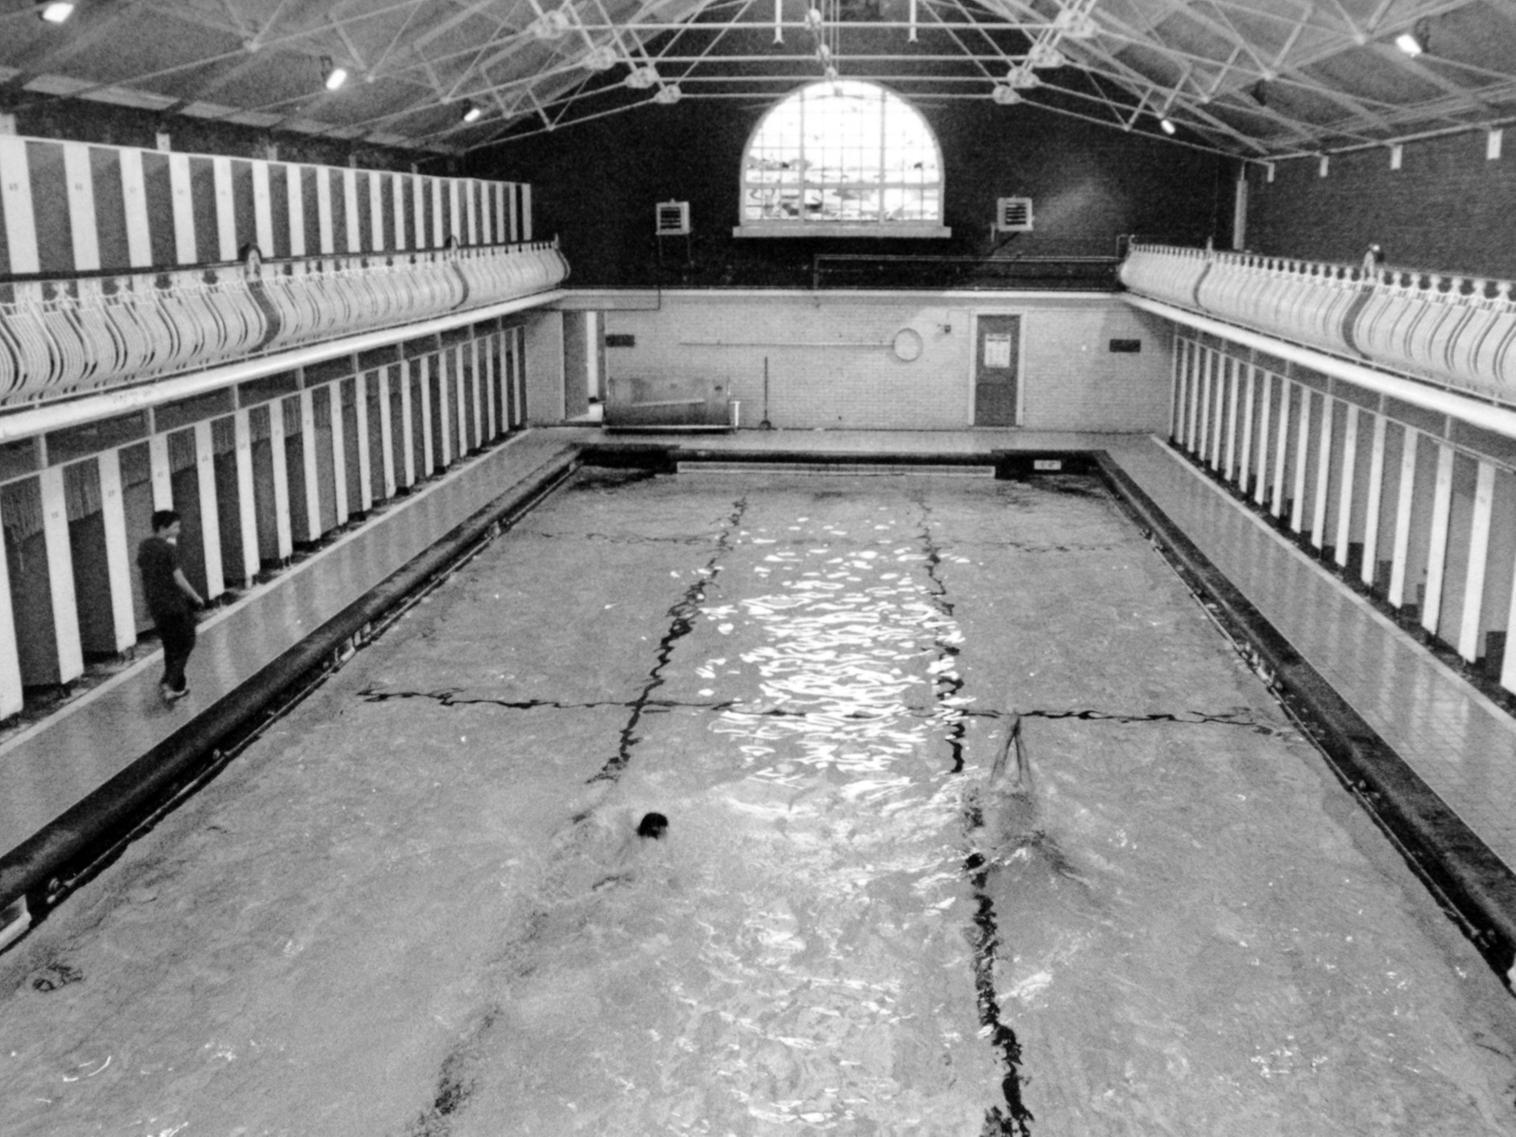 Taking the plunge at Bramley Baths back in the mid-1980s.